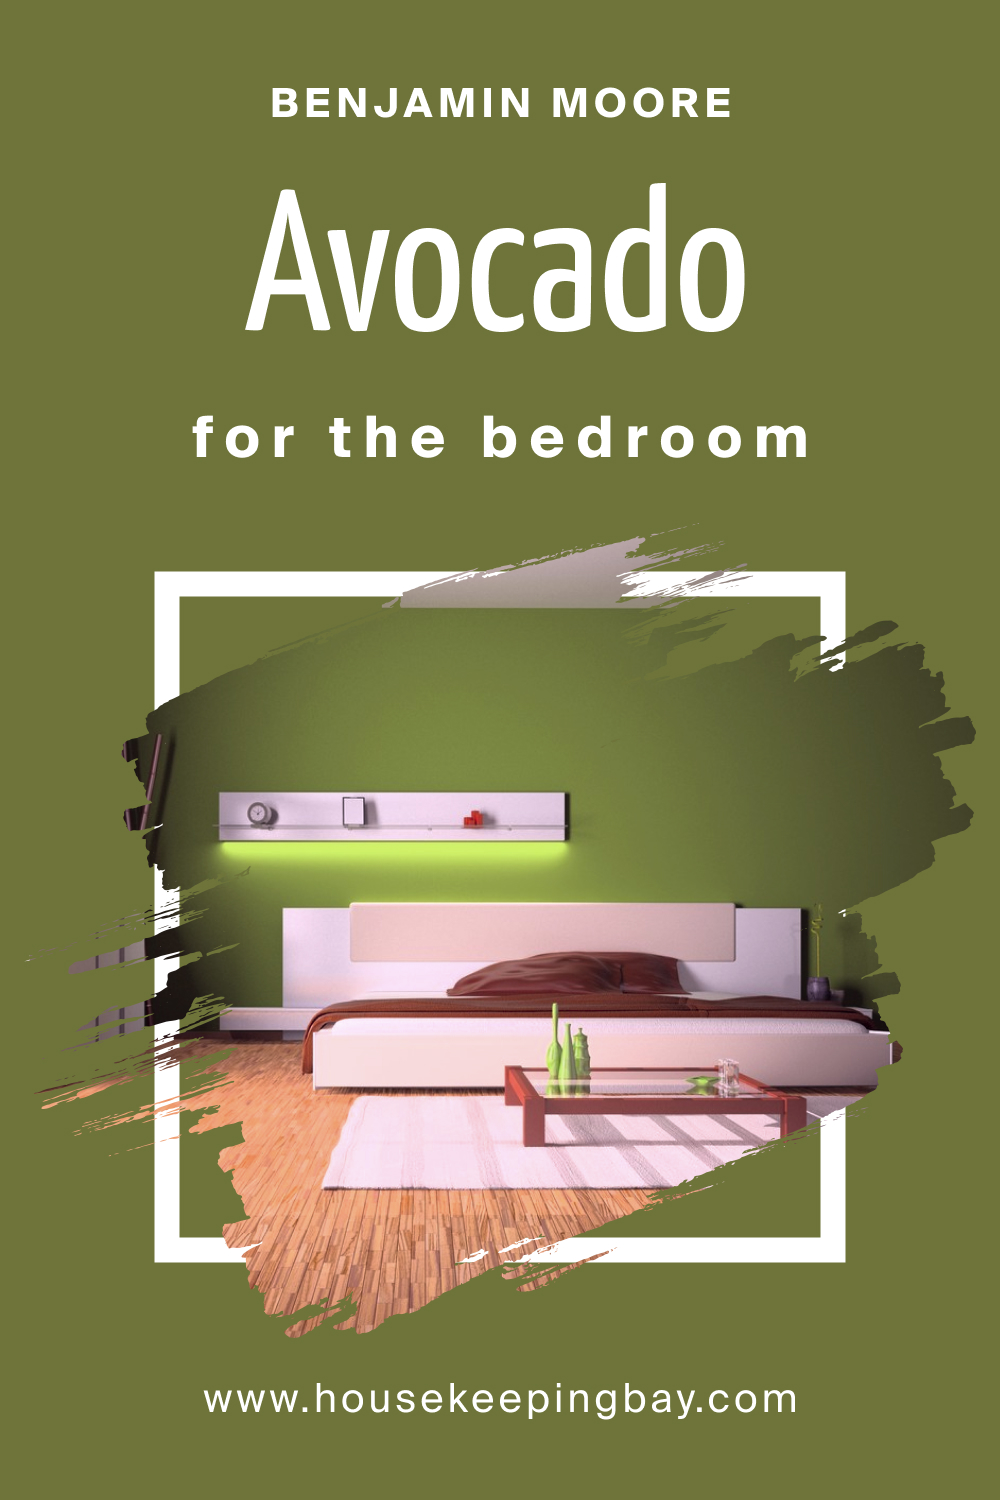 How to Use BM Avocado 2145-10 in the Bedroom?